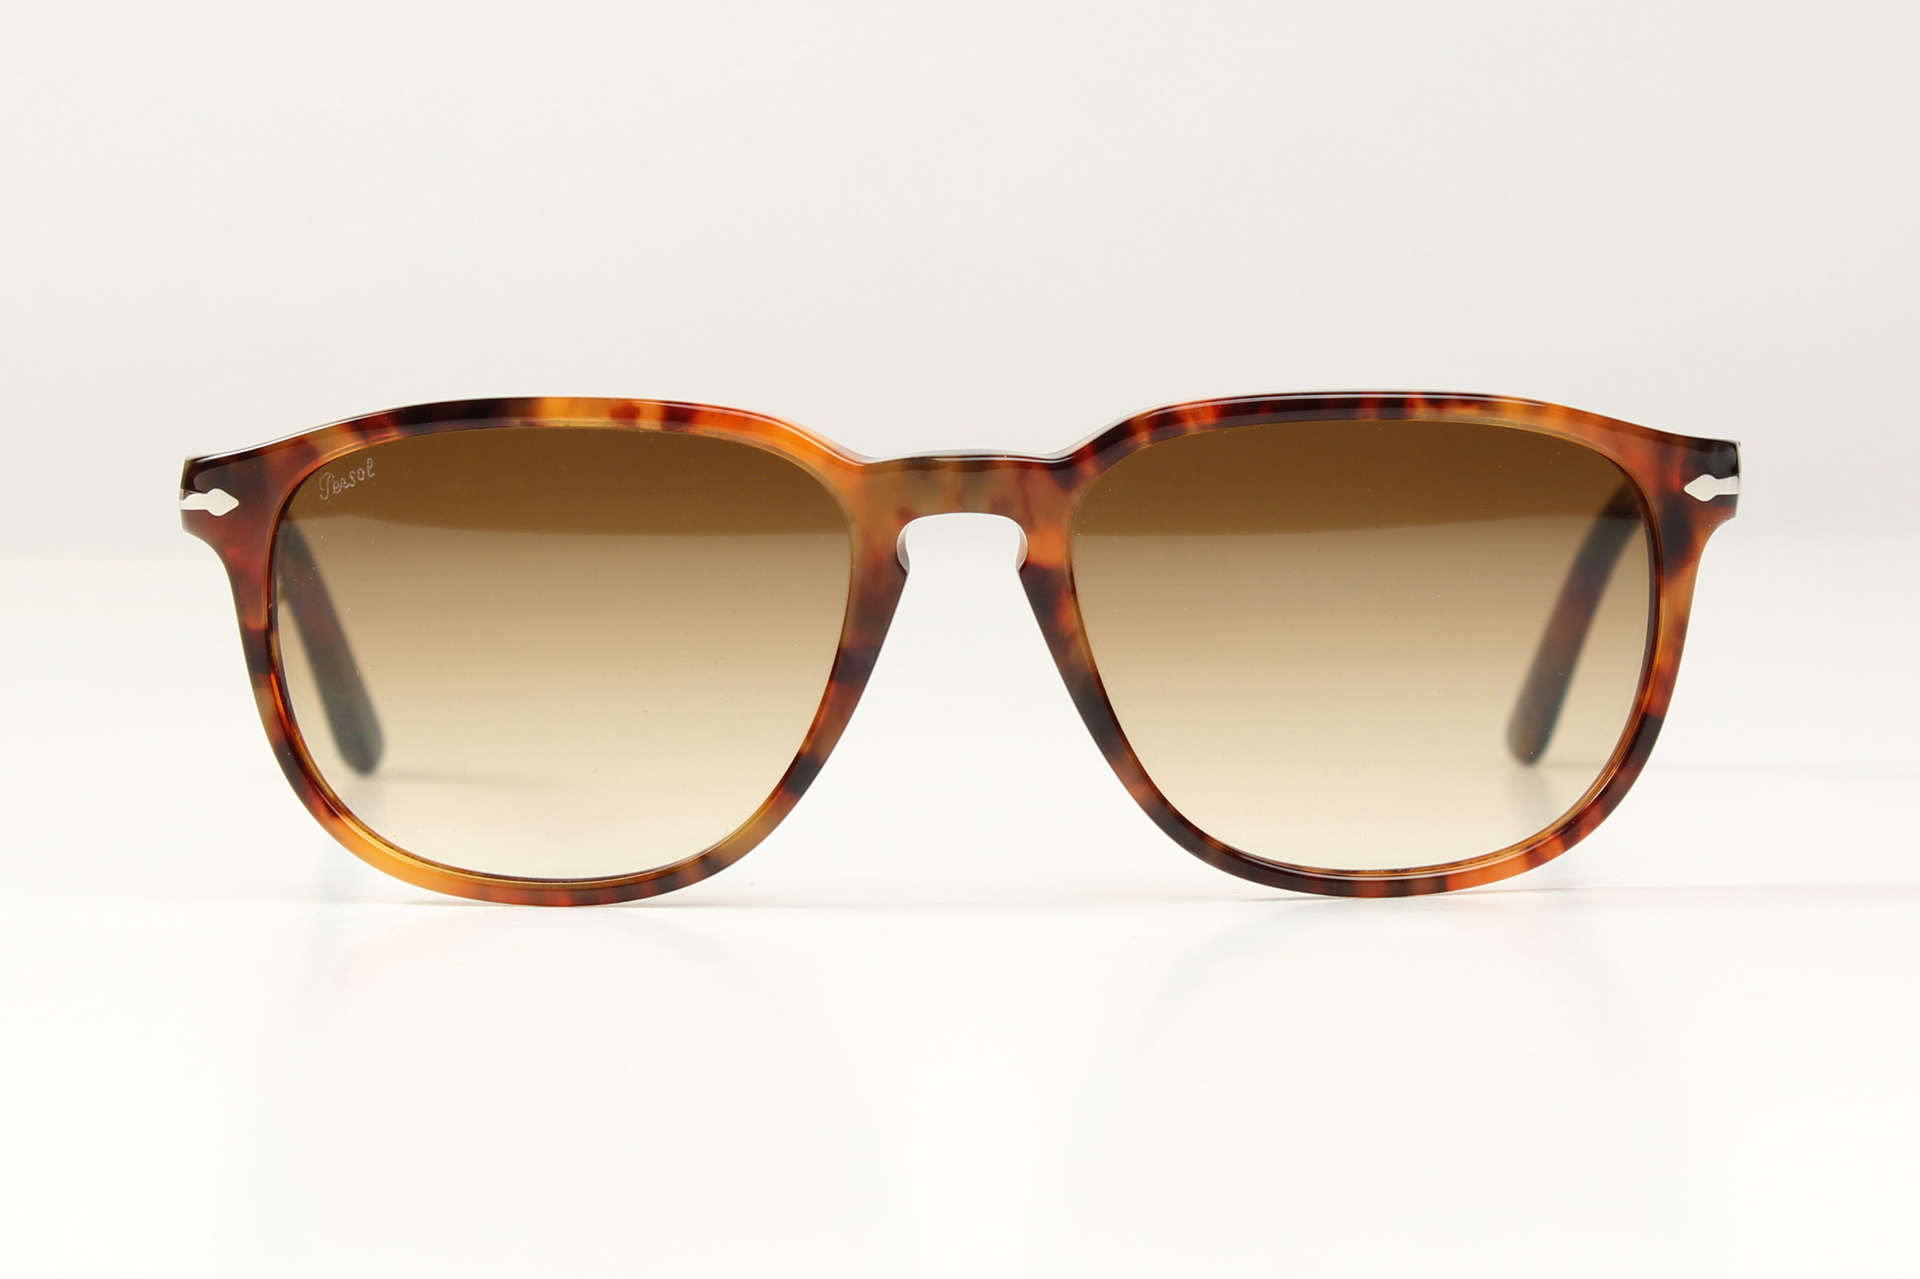 Persol 3019-S 108/51